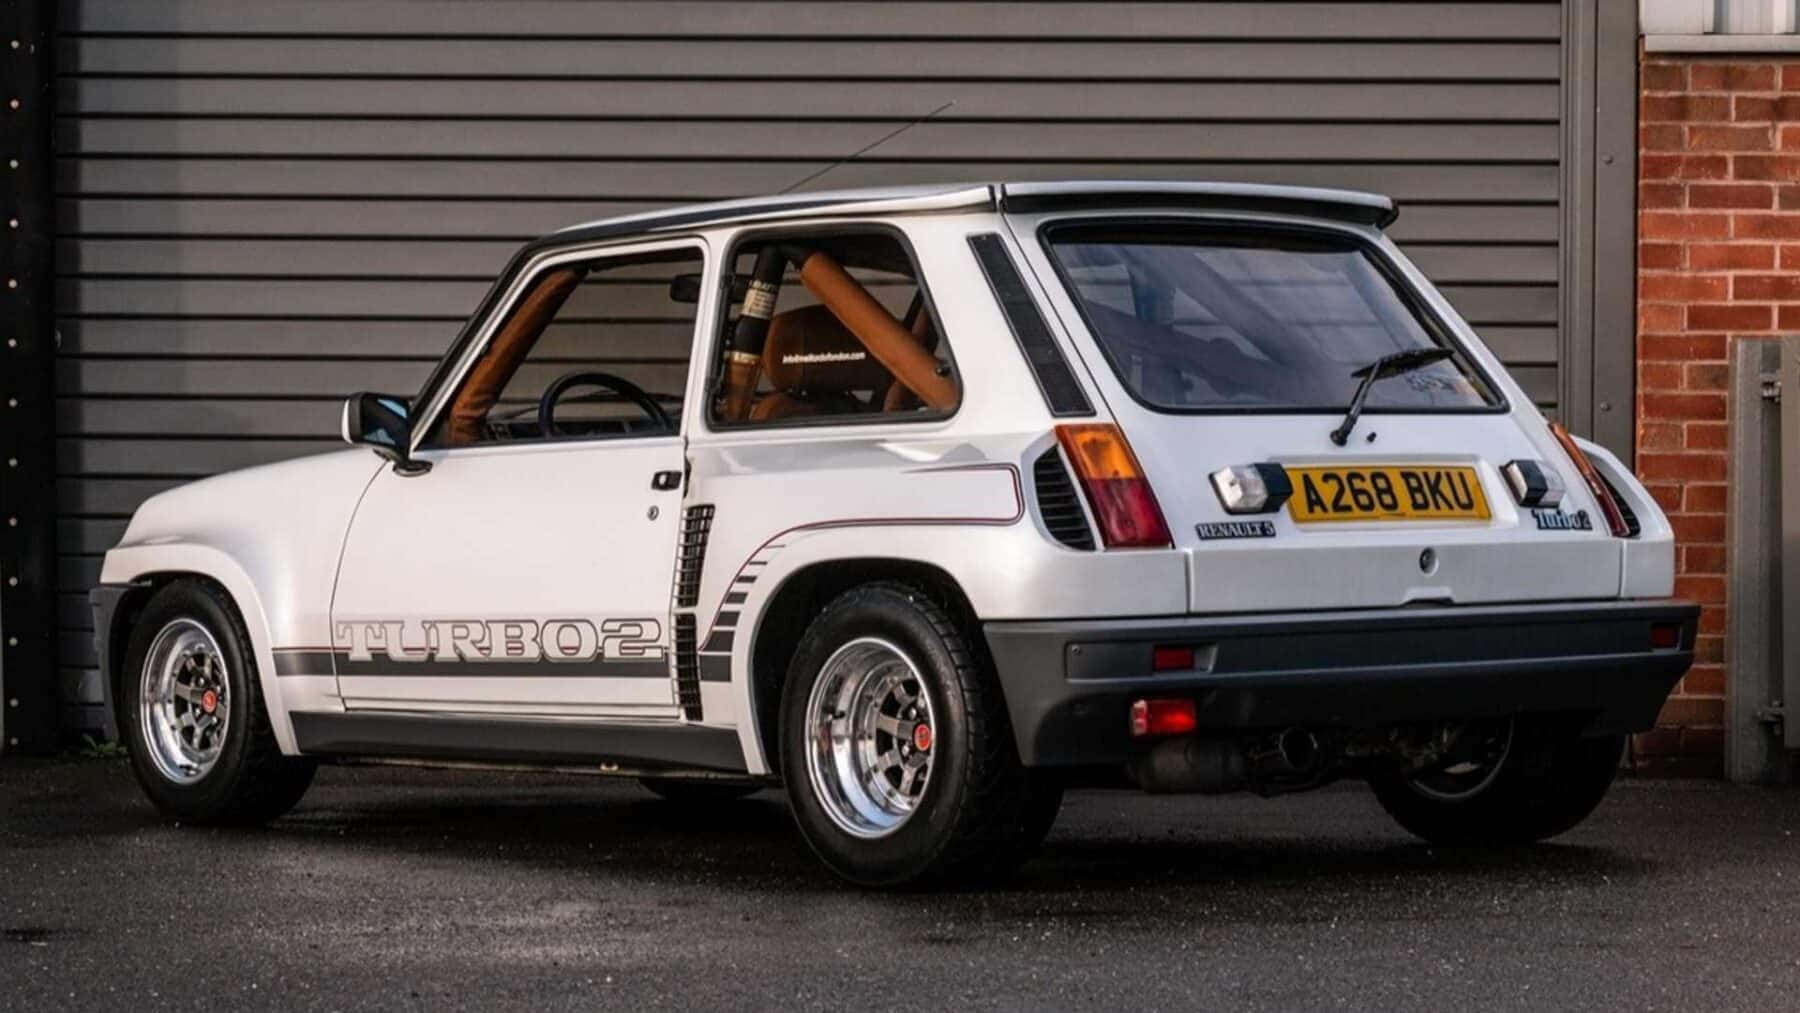 A Classic Renault 5 Turbo Showcased in Style Wallpaper